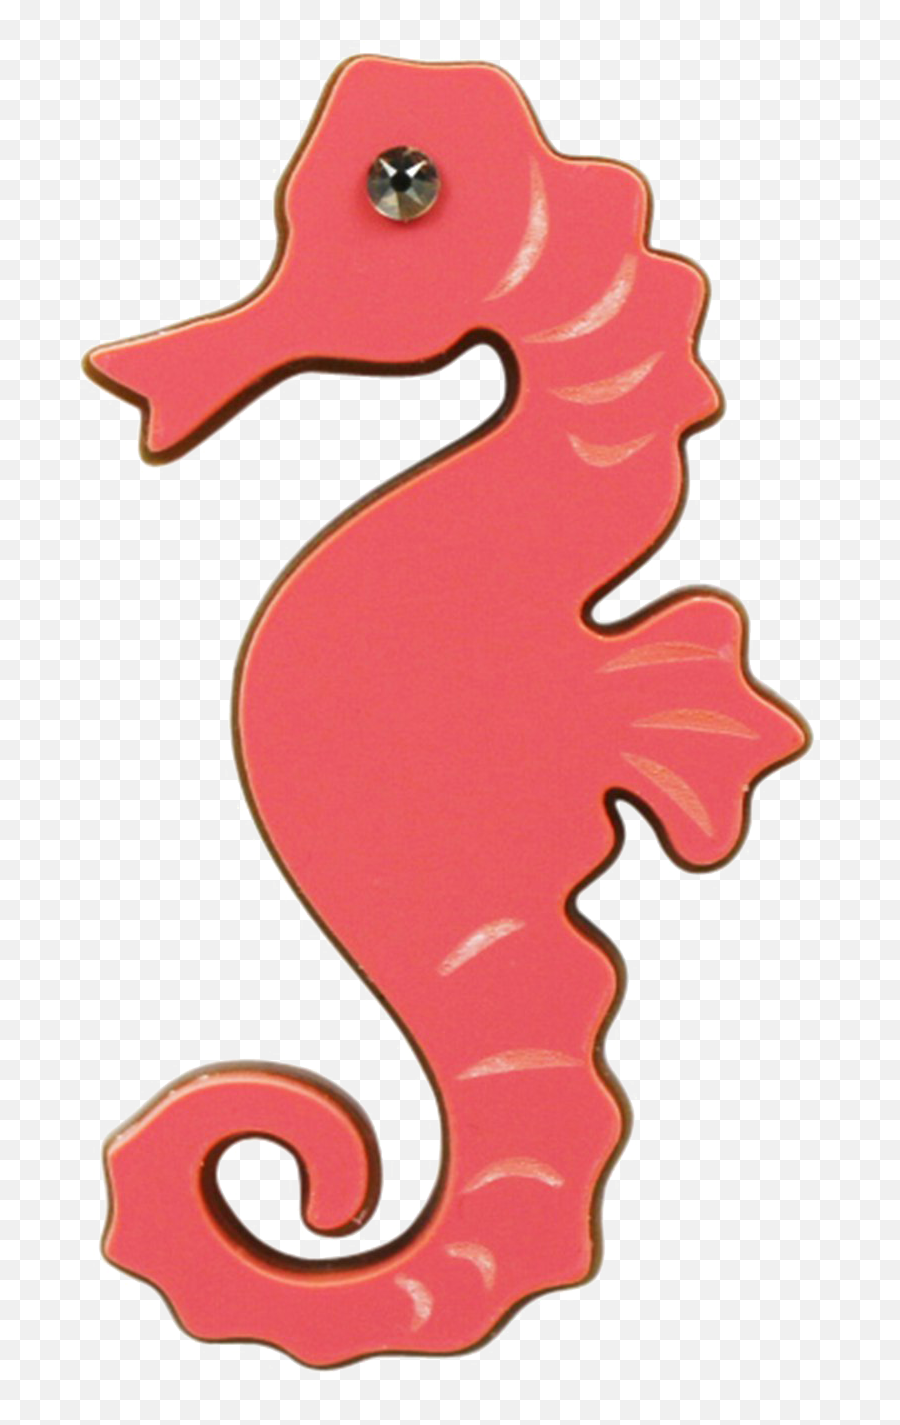 Pink Seahorse Png Free Download - Portable Network Graphics,Seahorse Png